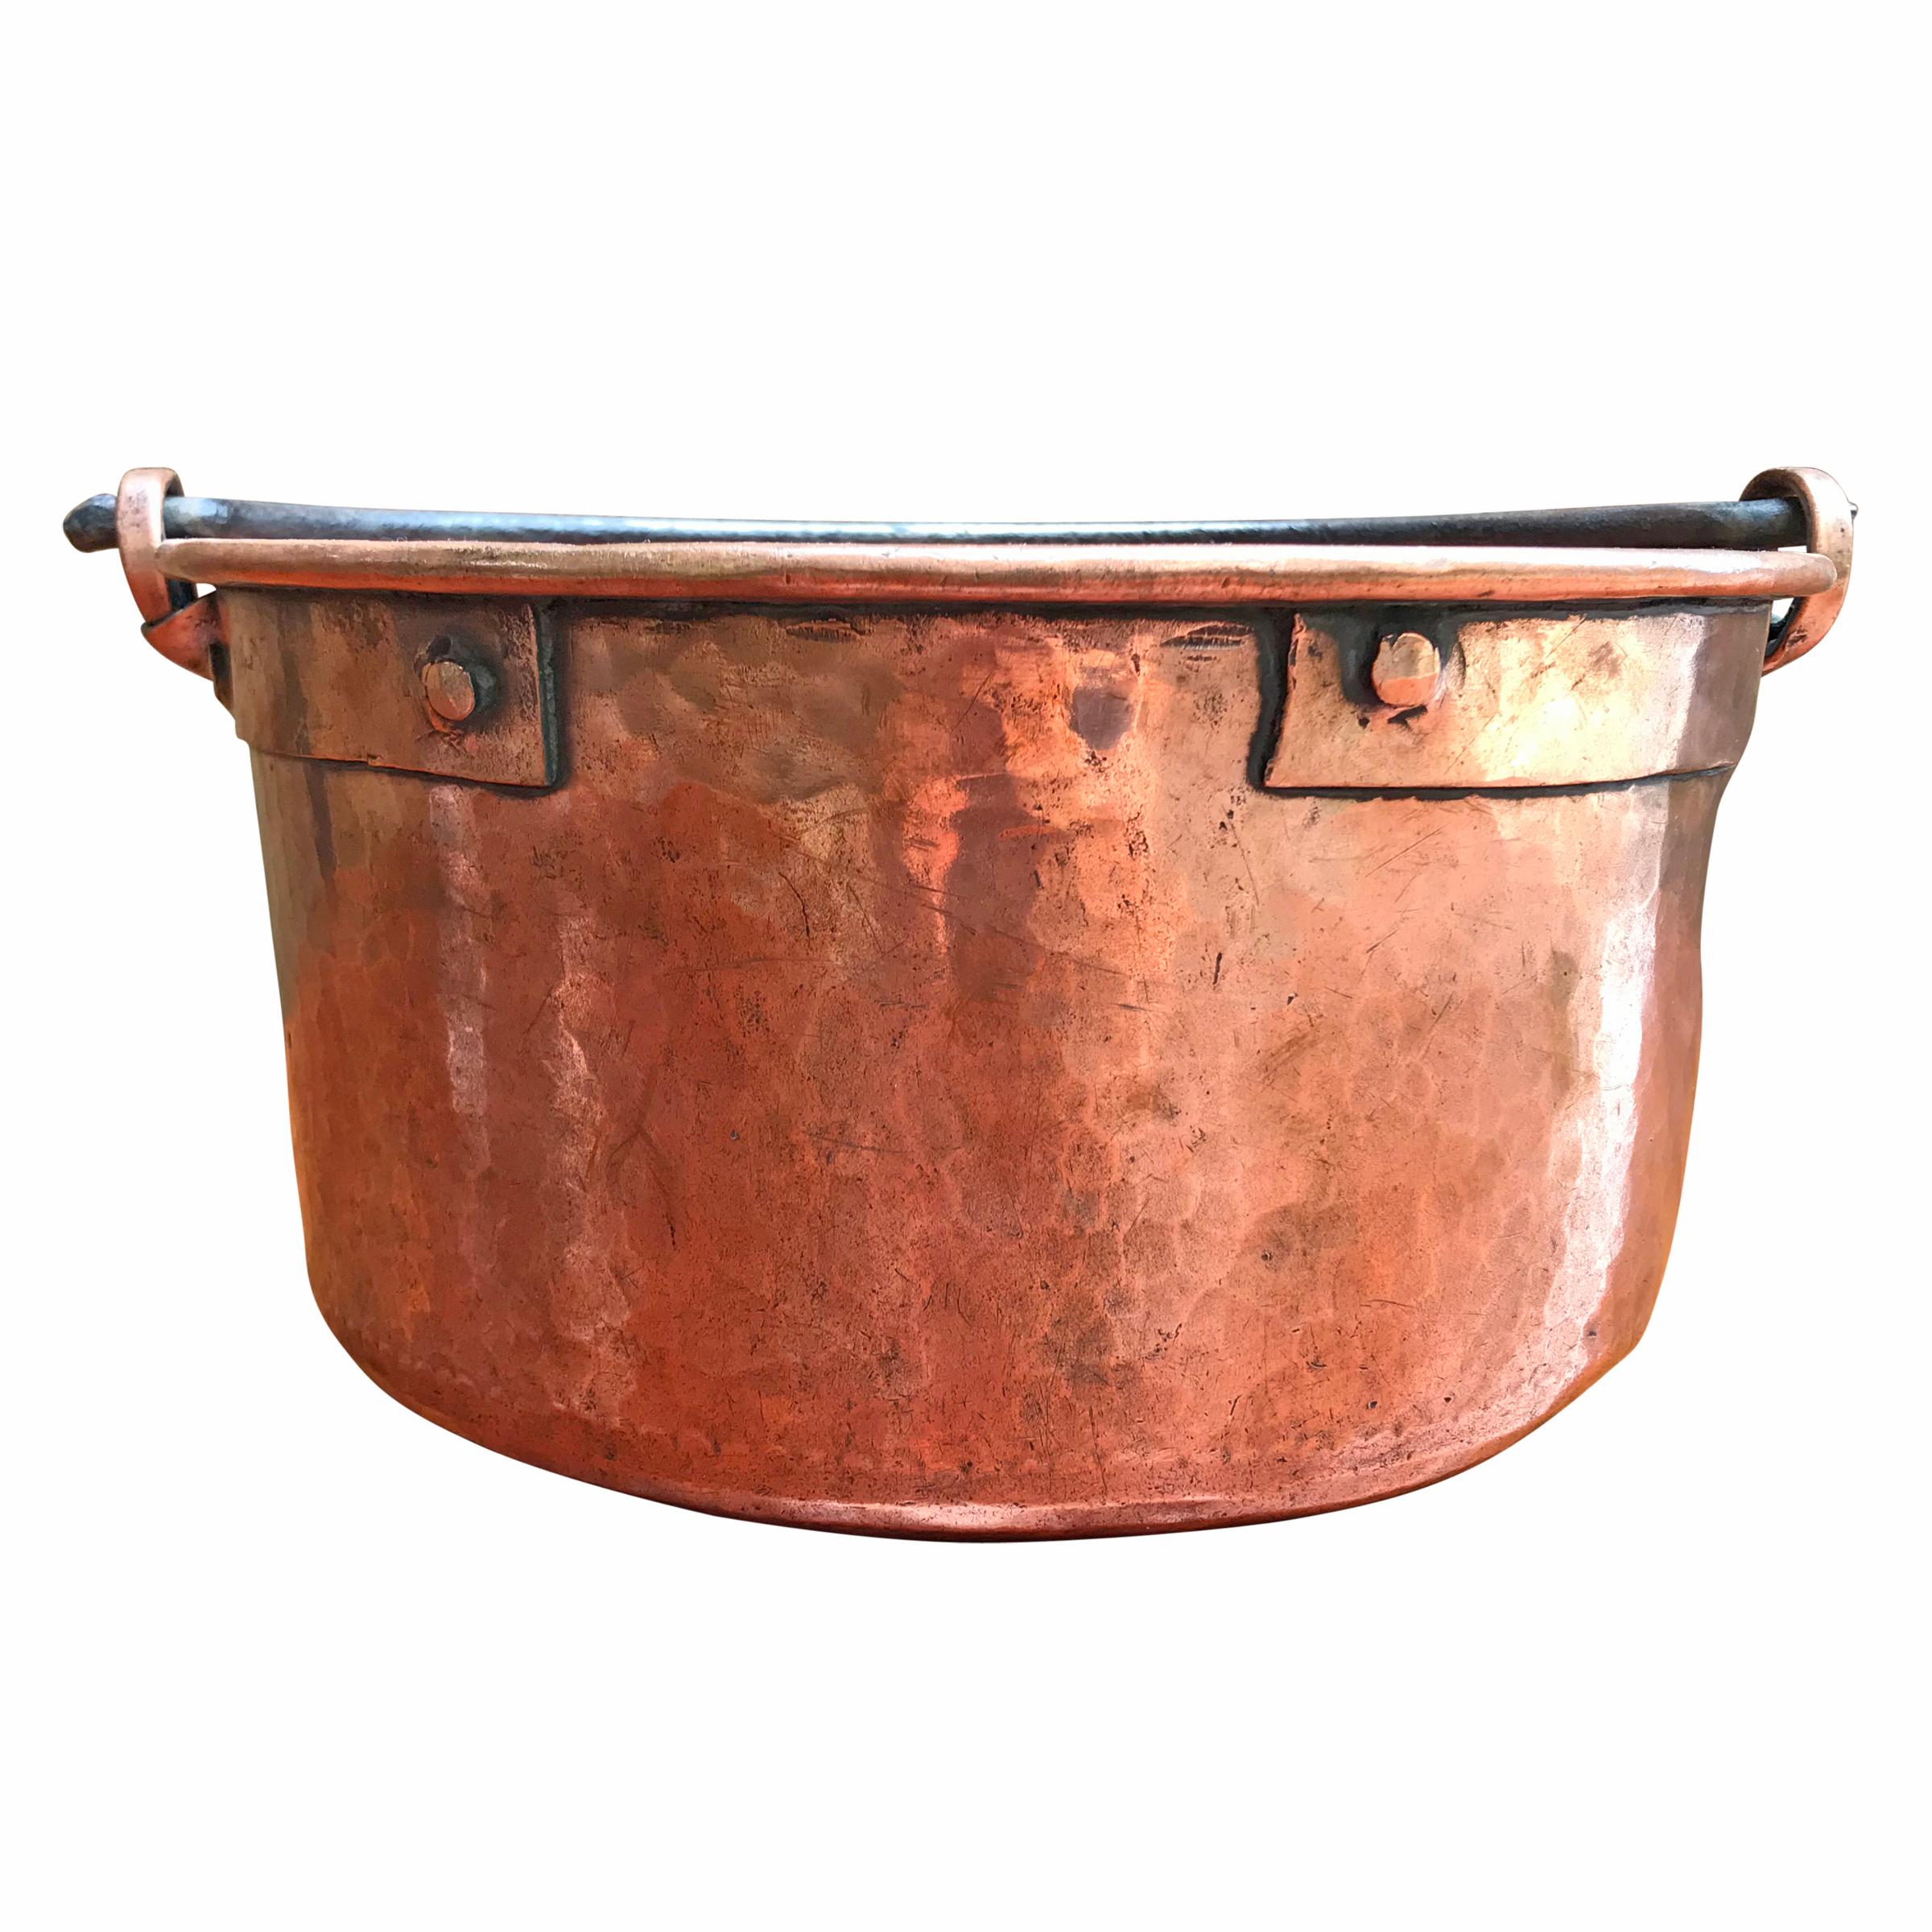 An early 19th century French hammered copper kettle with wide riveted copper straps, a thick hand-forged iron handle, and scalloped dovetail joinery around the bottom.